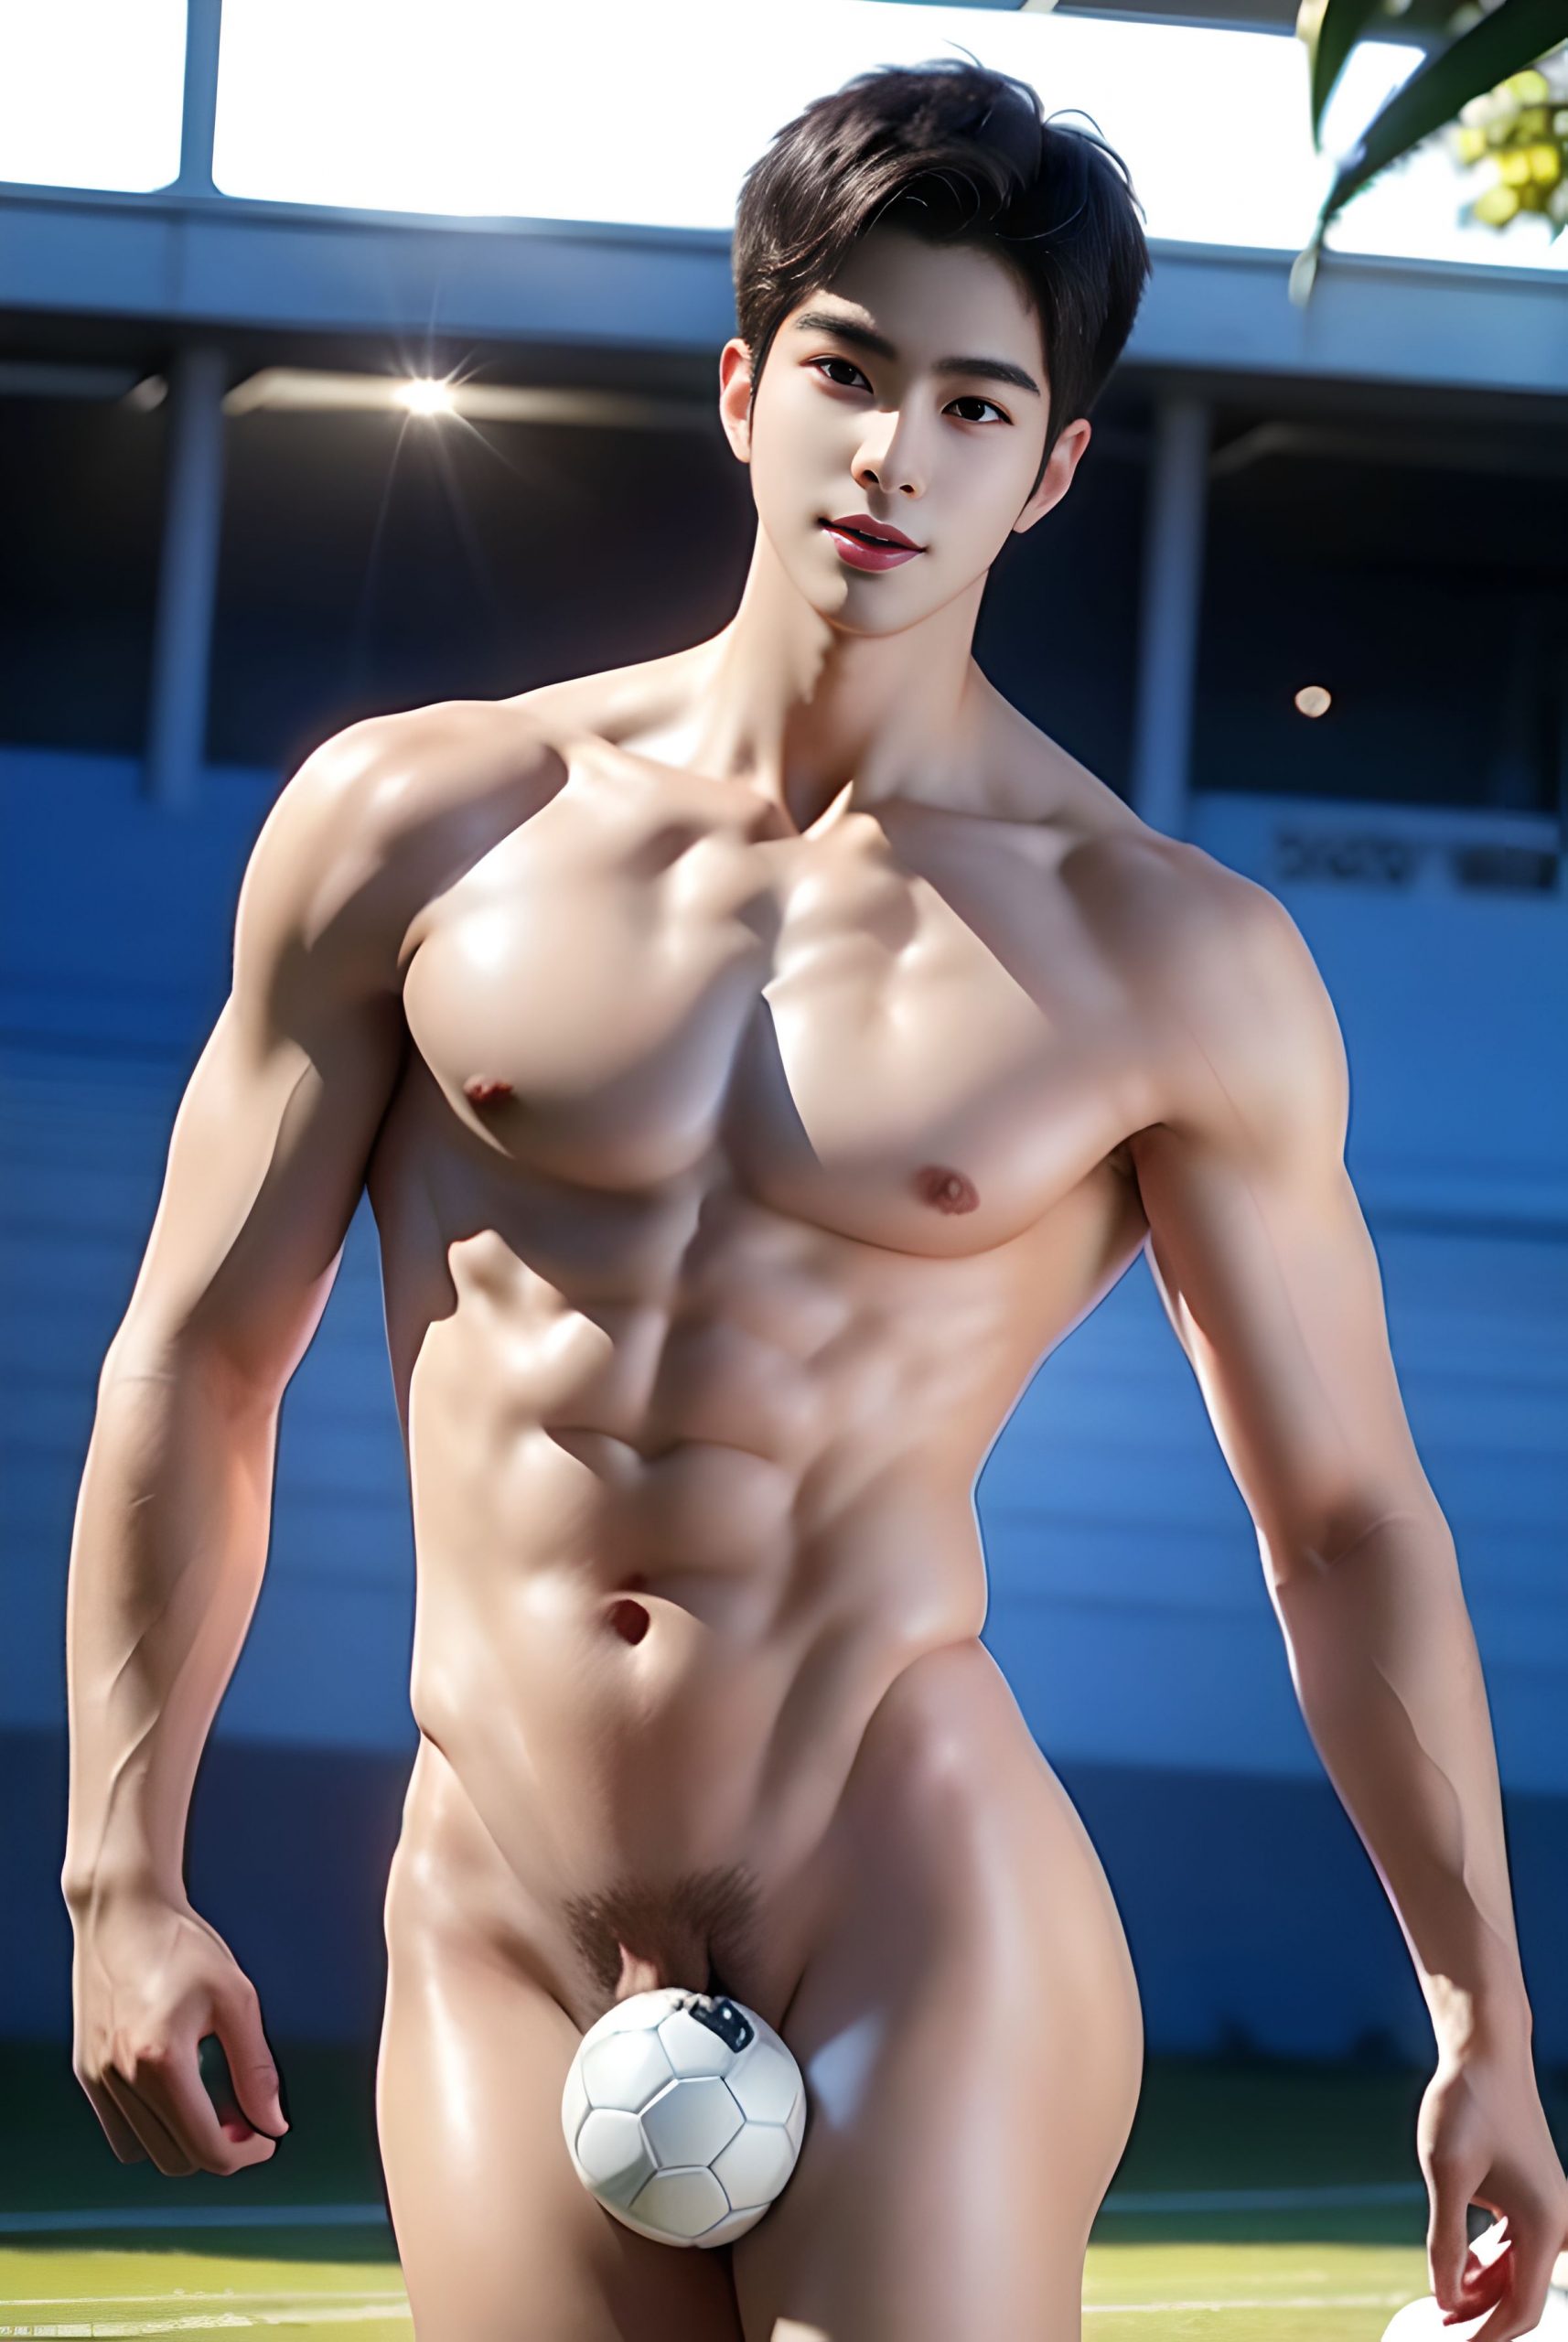 Customized services from super member BAB – Kpop style handsome show dick nsfw (39 Pictures) Super Member Only - 2023-06-03